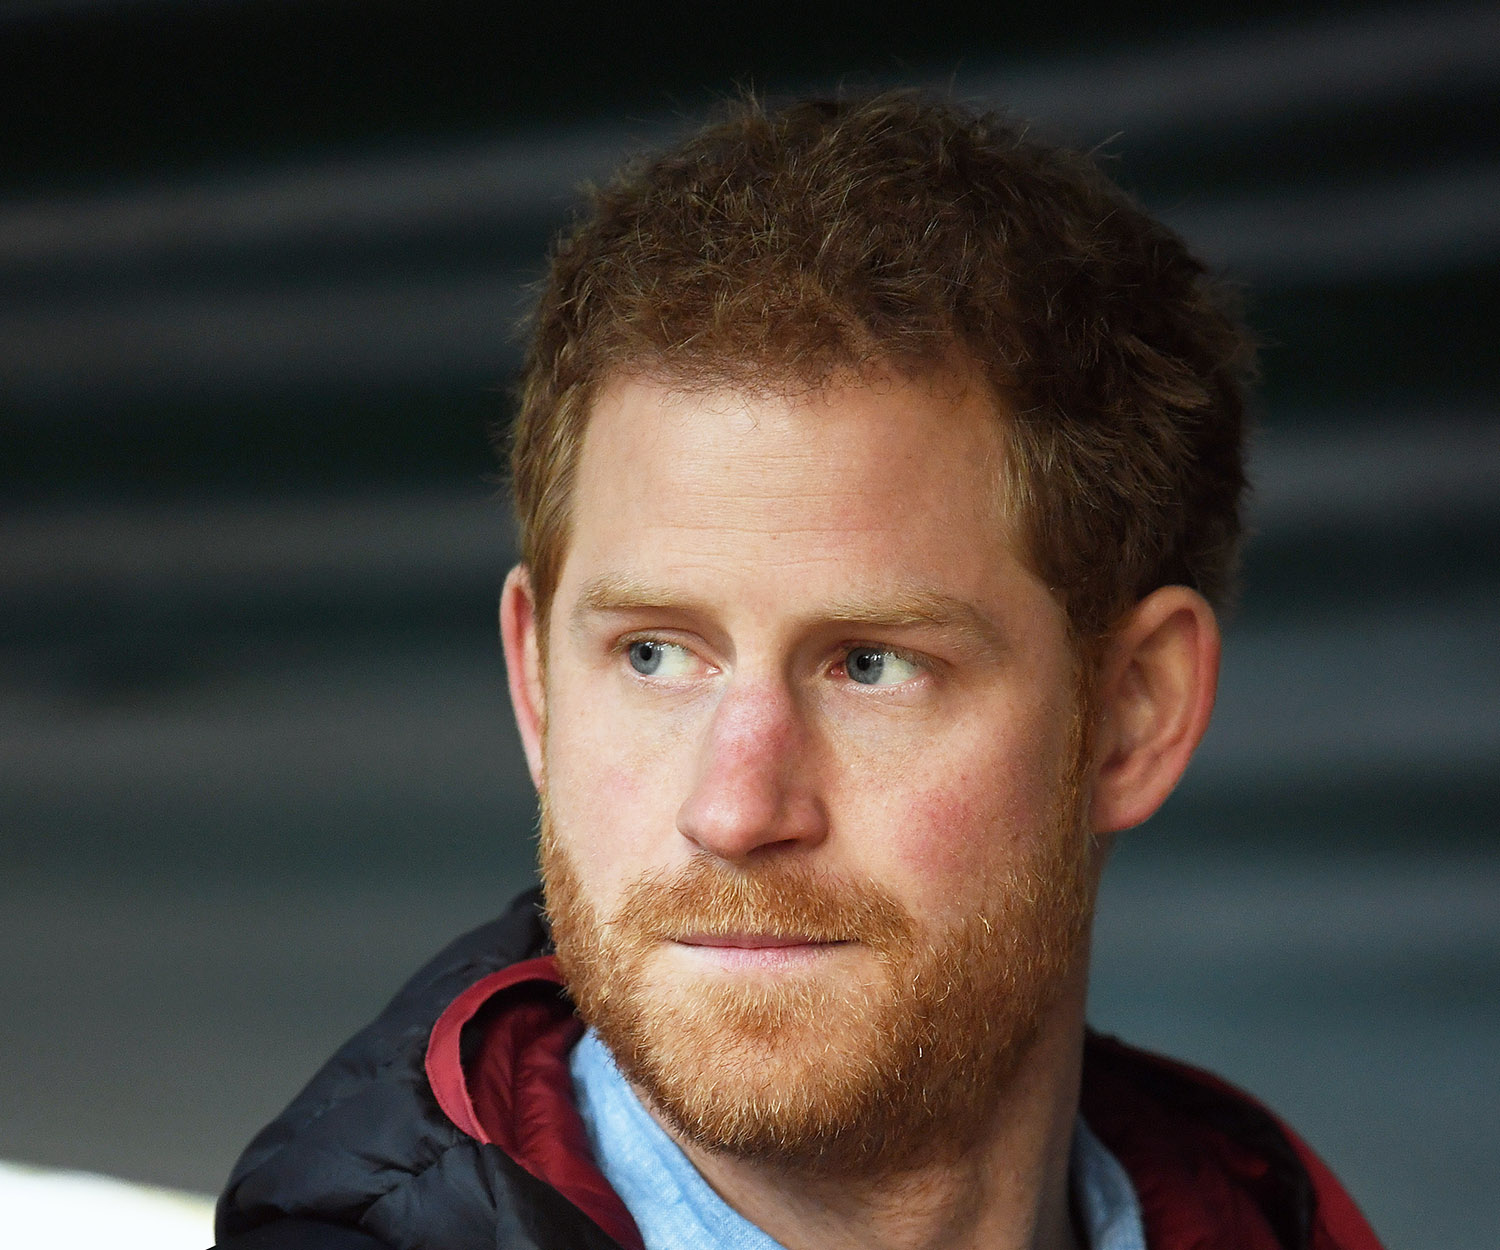 Prince Harry shares an emotional video after the Invictus Games is postponed due to Covid-19